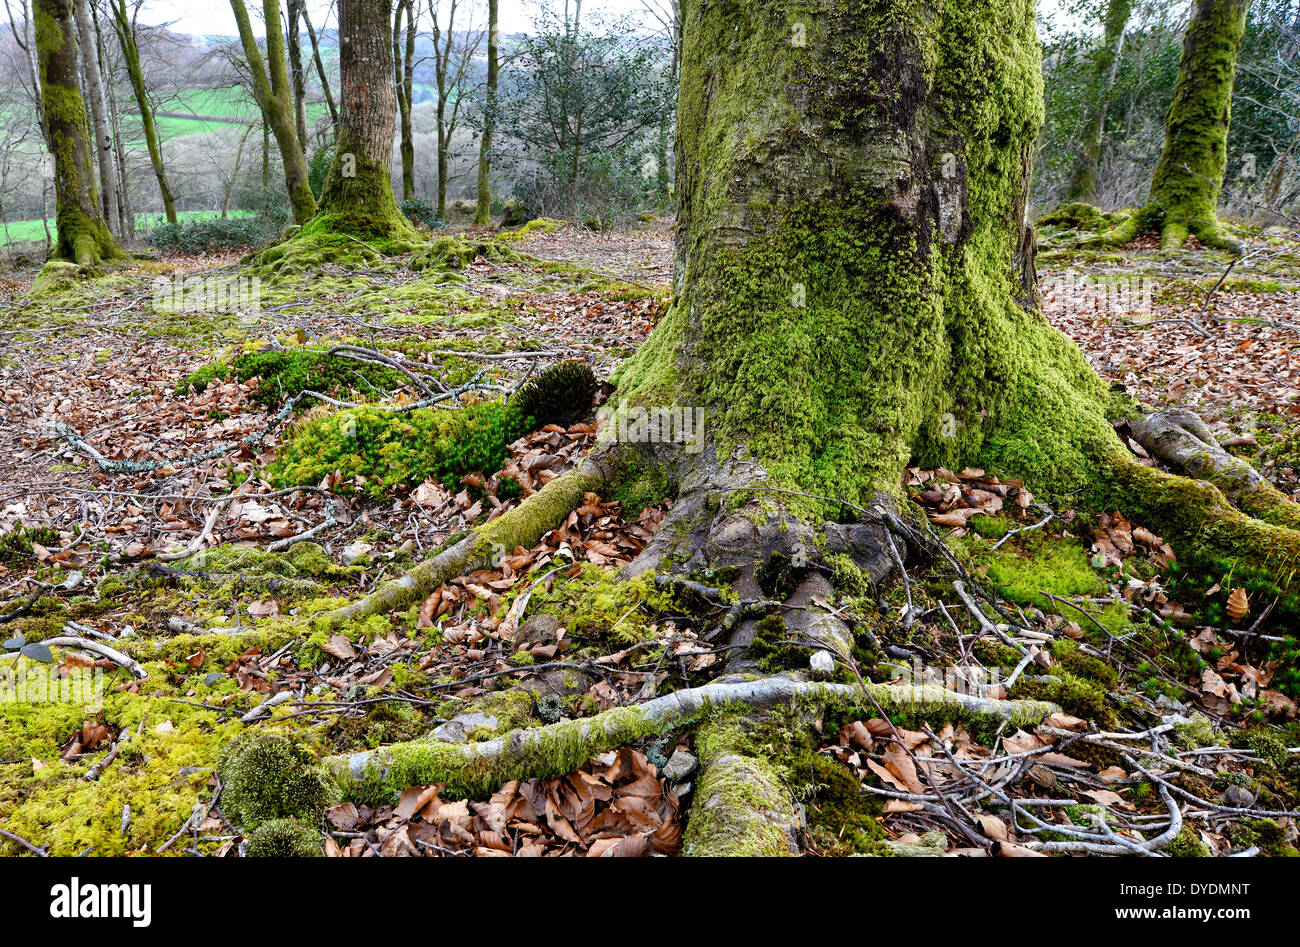 Mossy tree roots of Beech trees growing in Hart Woods near Lanhydrock in Cornwall Stock Photo